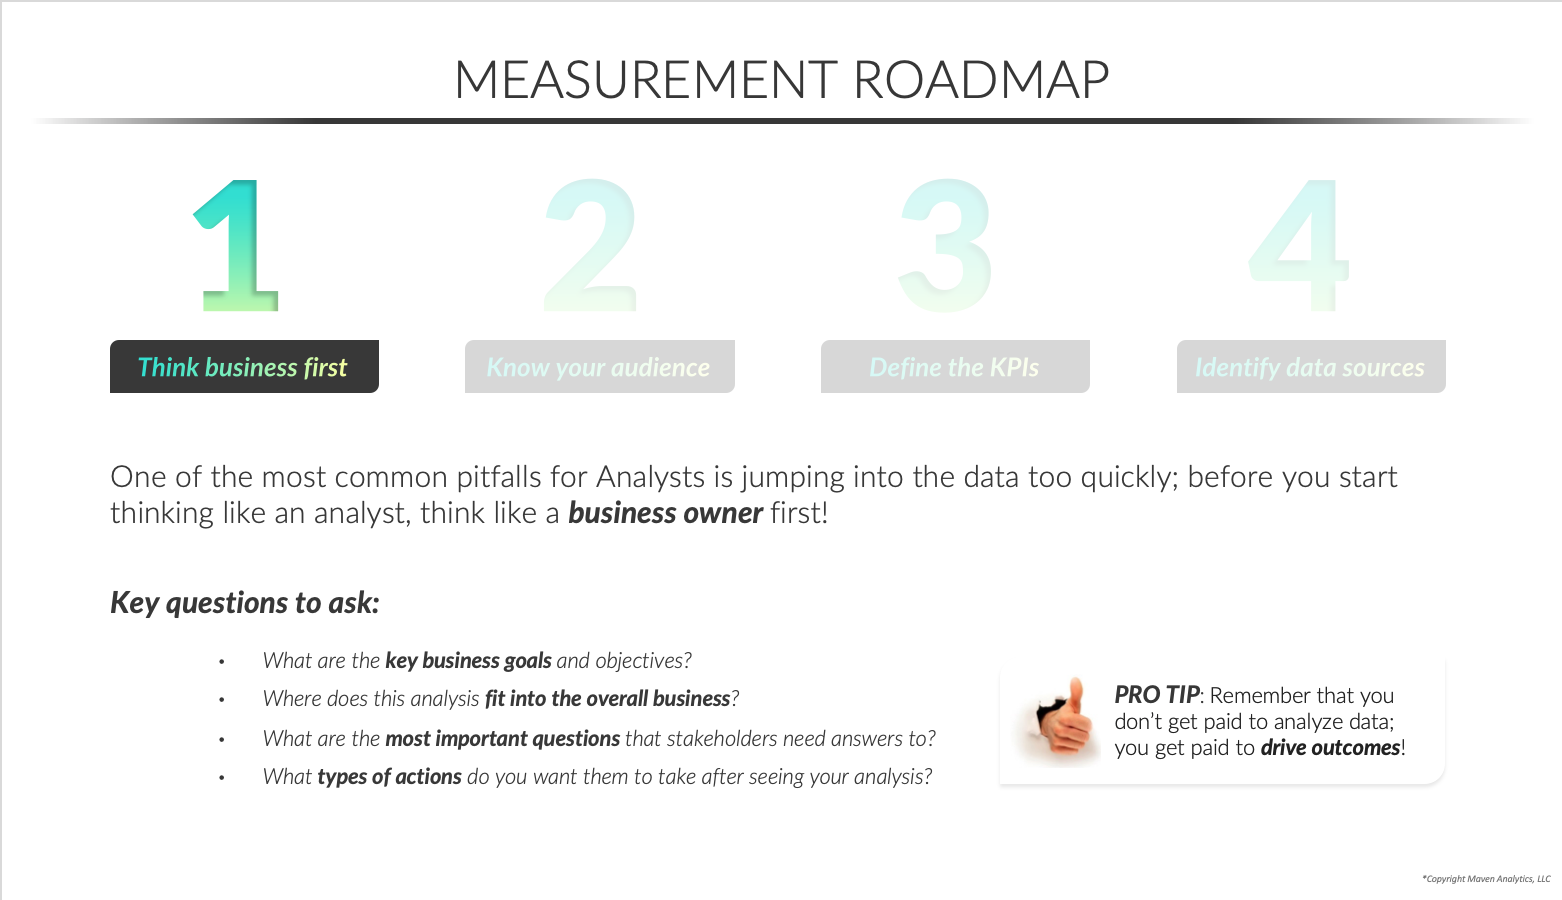 Measurement Planning Step 1 - Think Business First